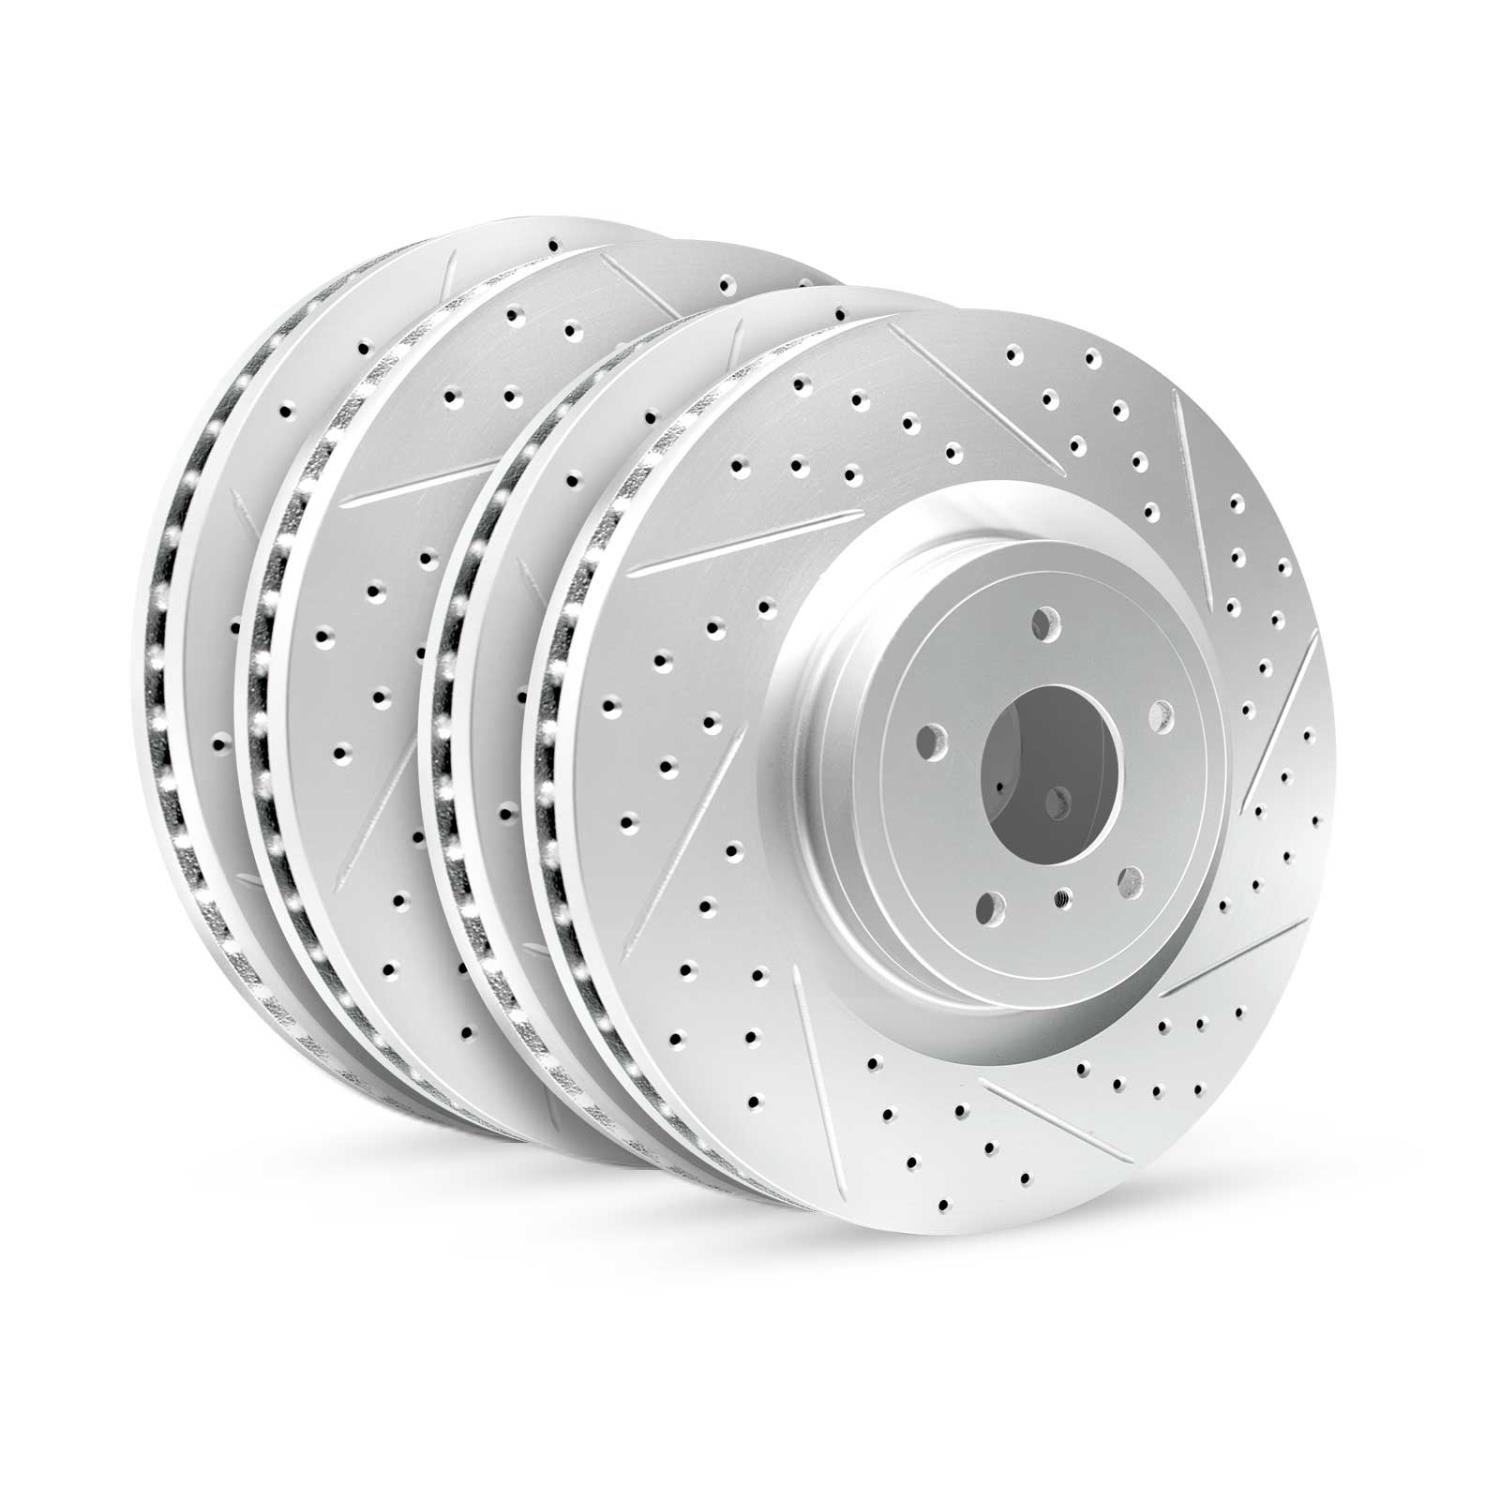 GEO-Carbon Drilled/Slotted Rotors, 2013-2013 Acura/Honda, Position: Front/Rear